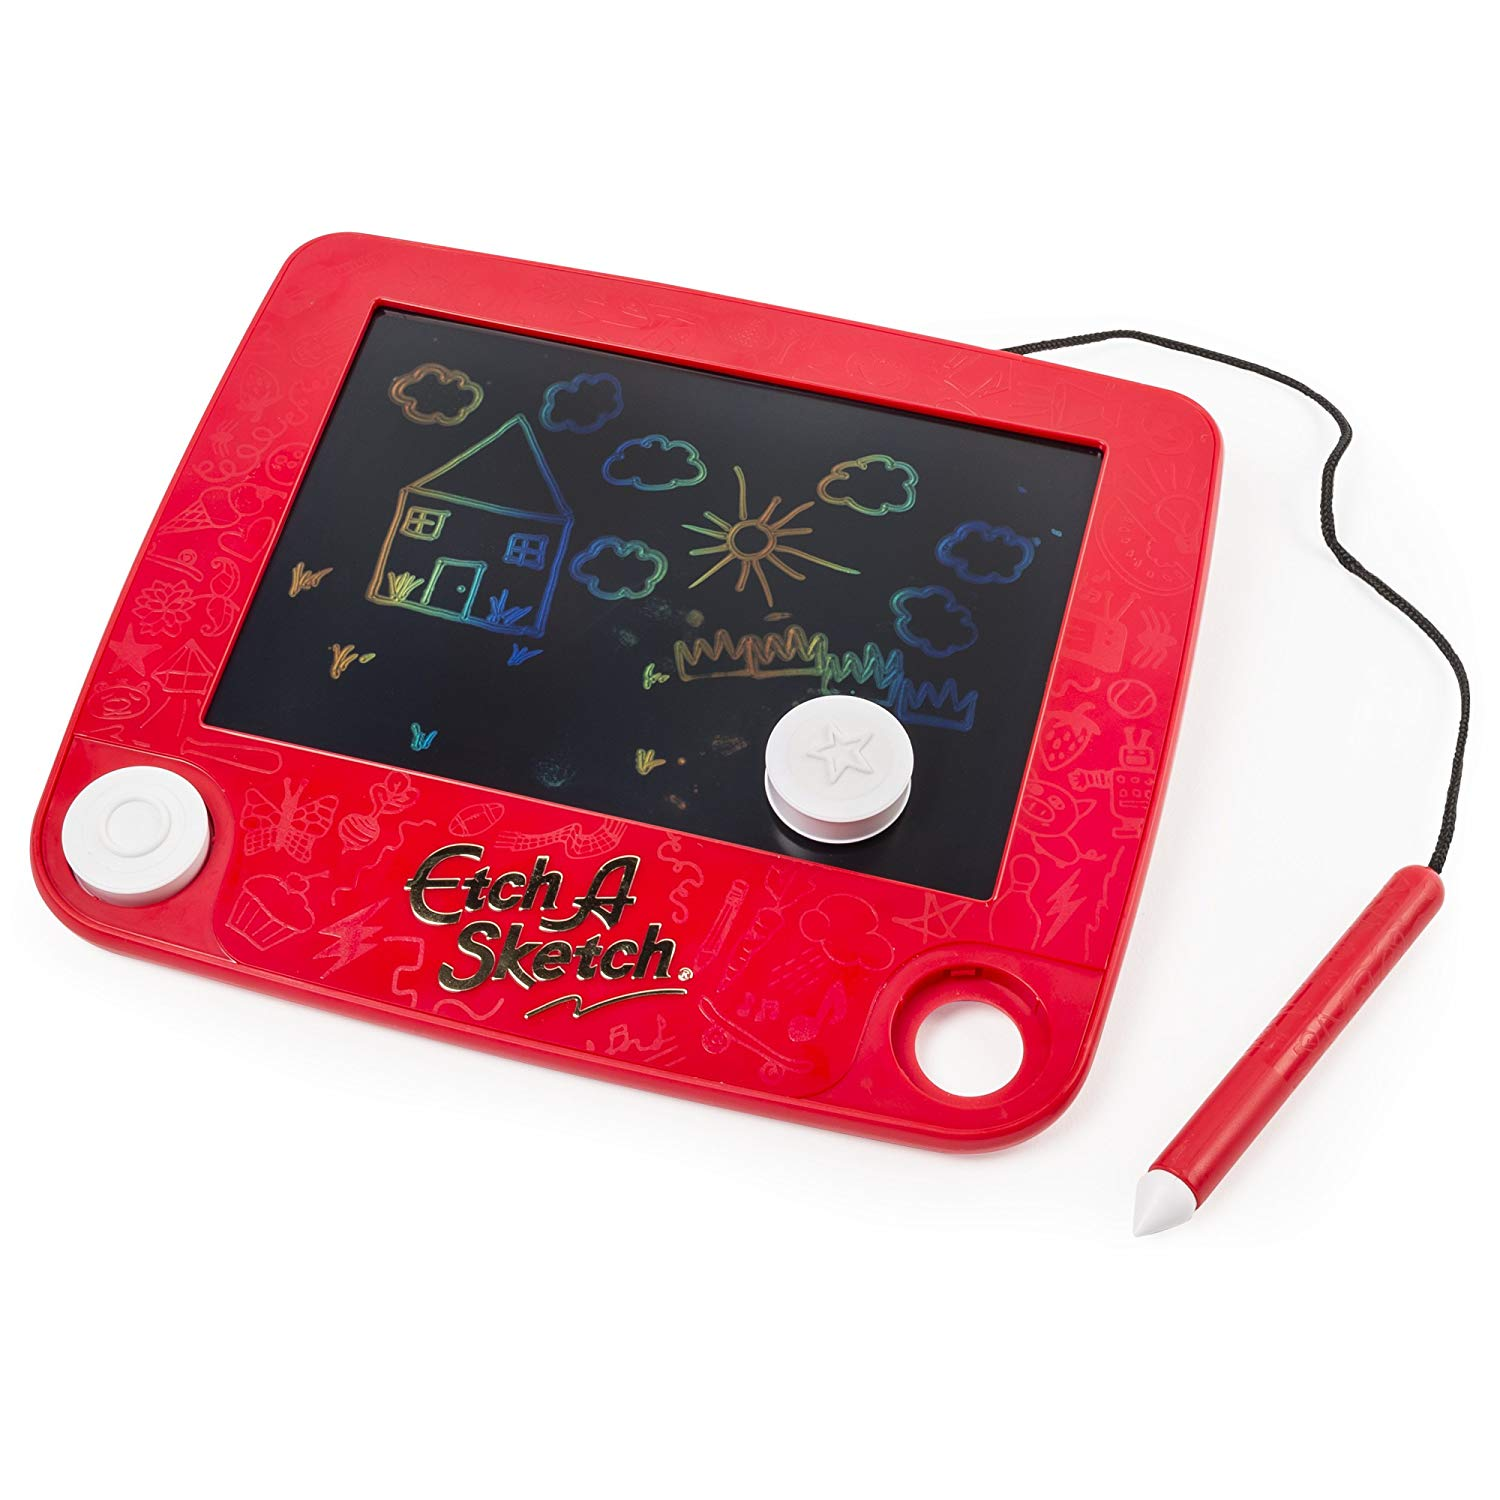 Etch A sketch Freestyle Drawing Pad Only $13.49! (Reg $24.99)